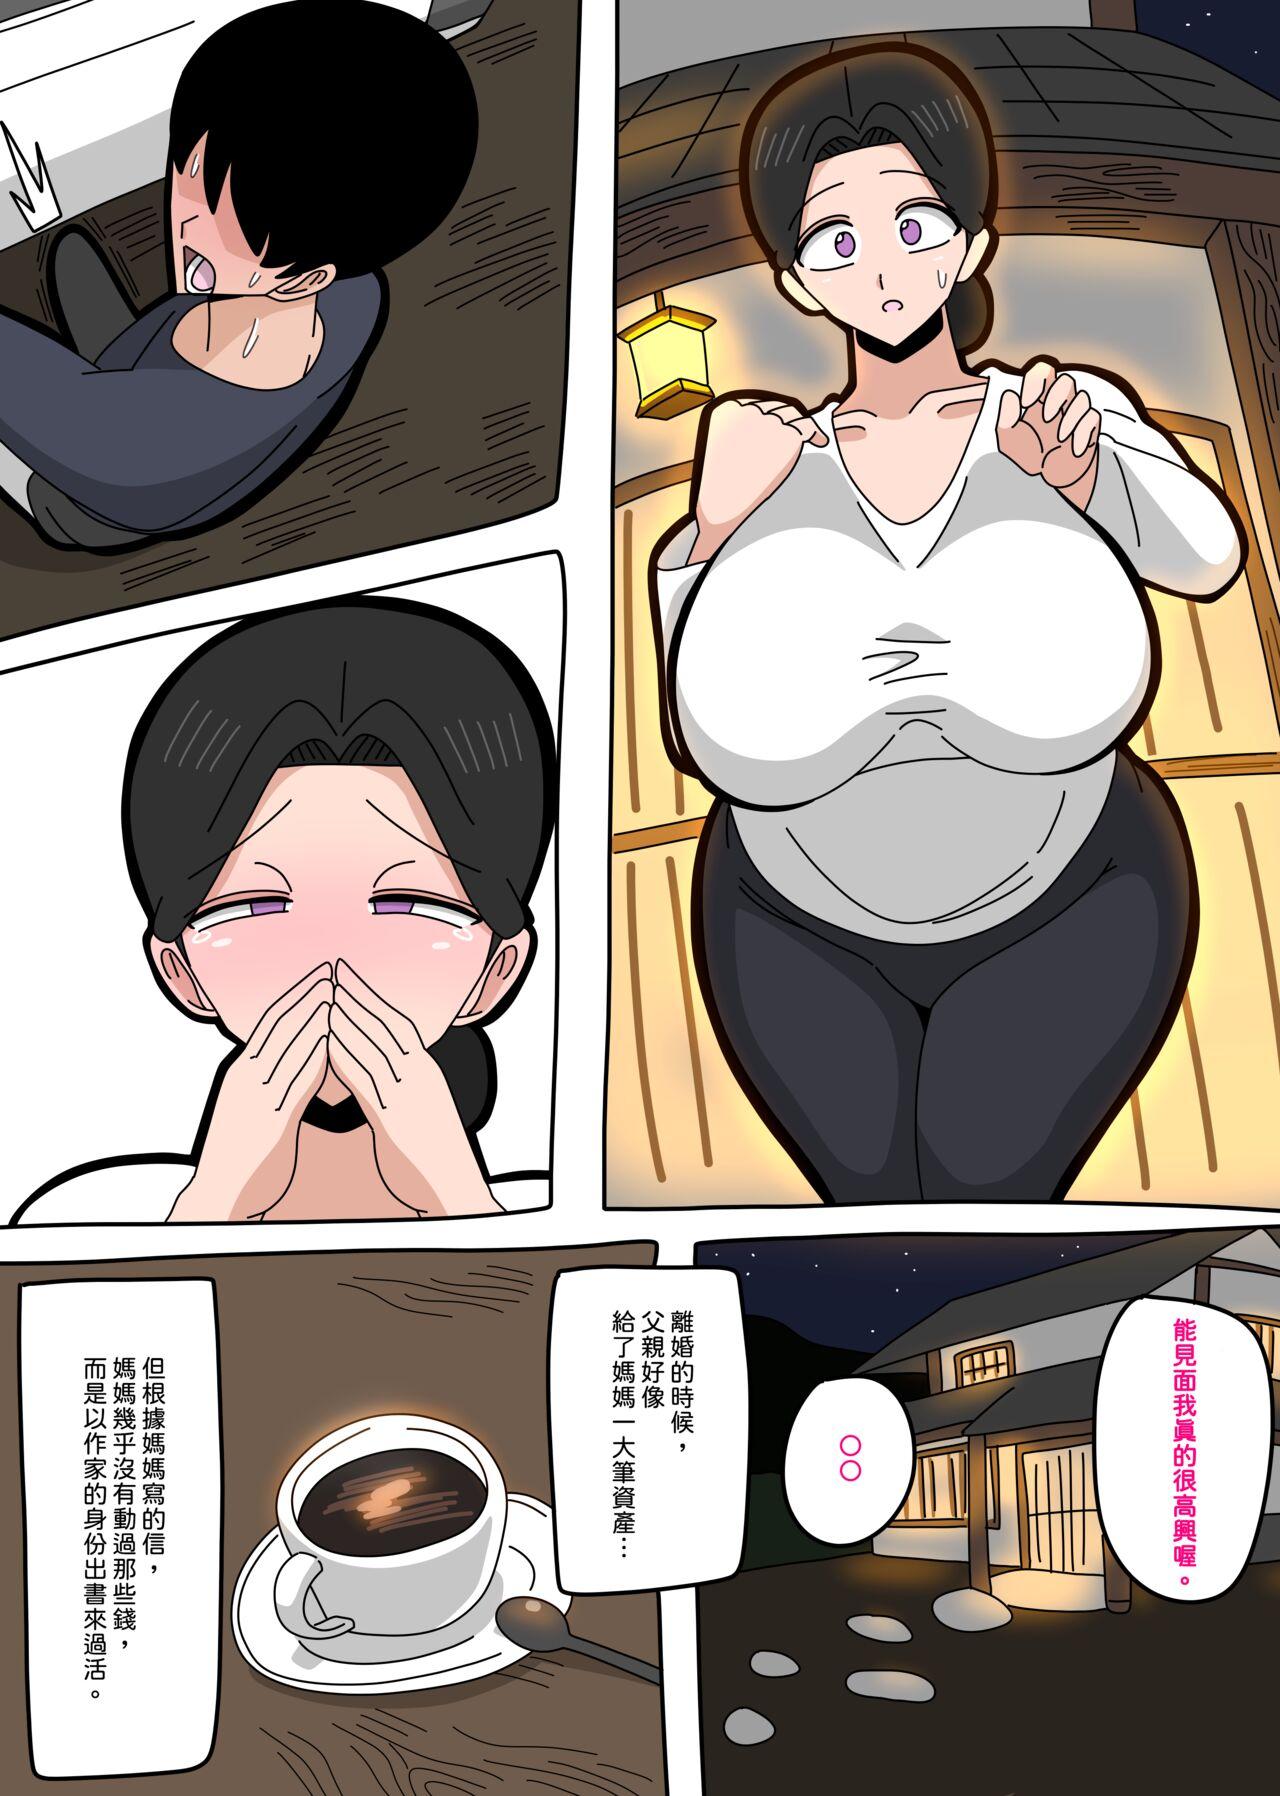 [18master] 2023-5-24 Meeting mom again after a long separation | 與媽媽重逢… [Chinese][興趣使然的個人機翻] 2